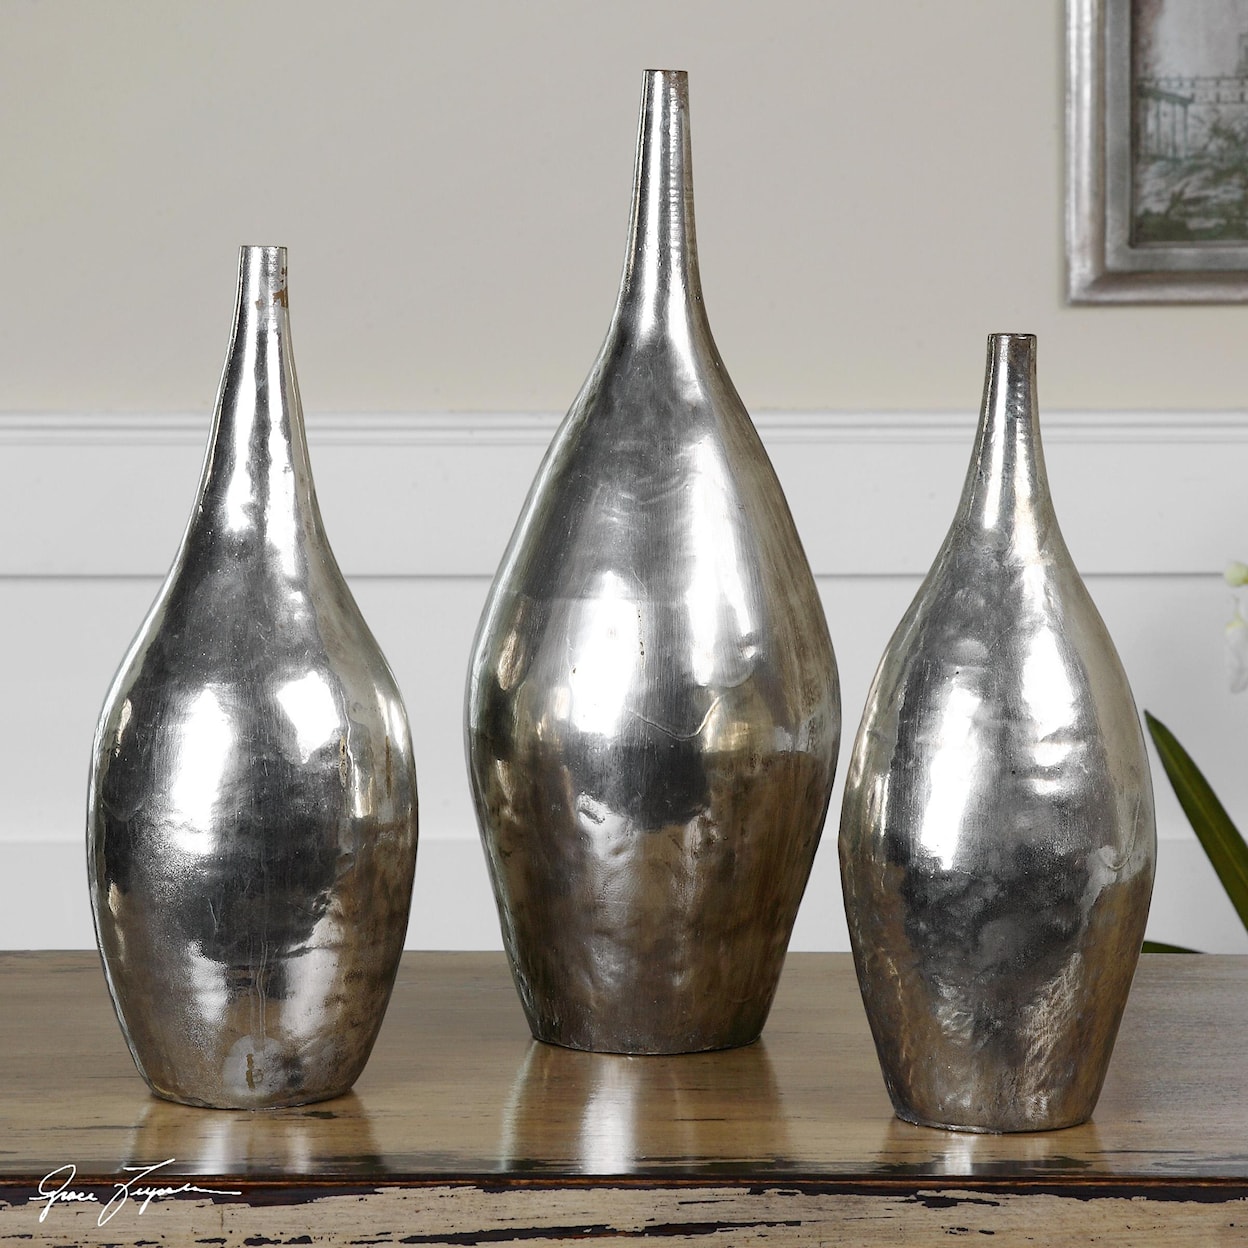 Uttermost Accessories - Vases and Urns Rajata Silver Vases Set of 3